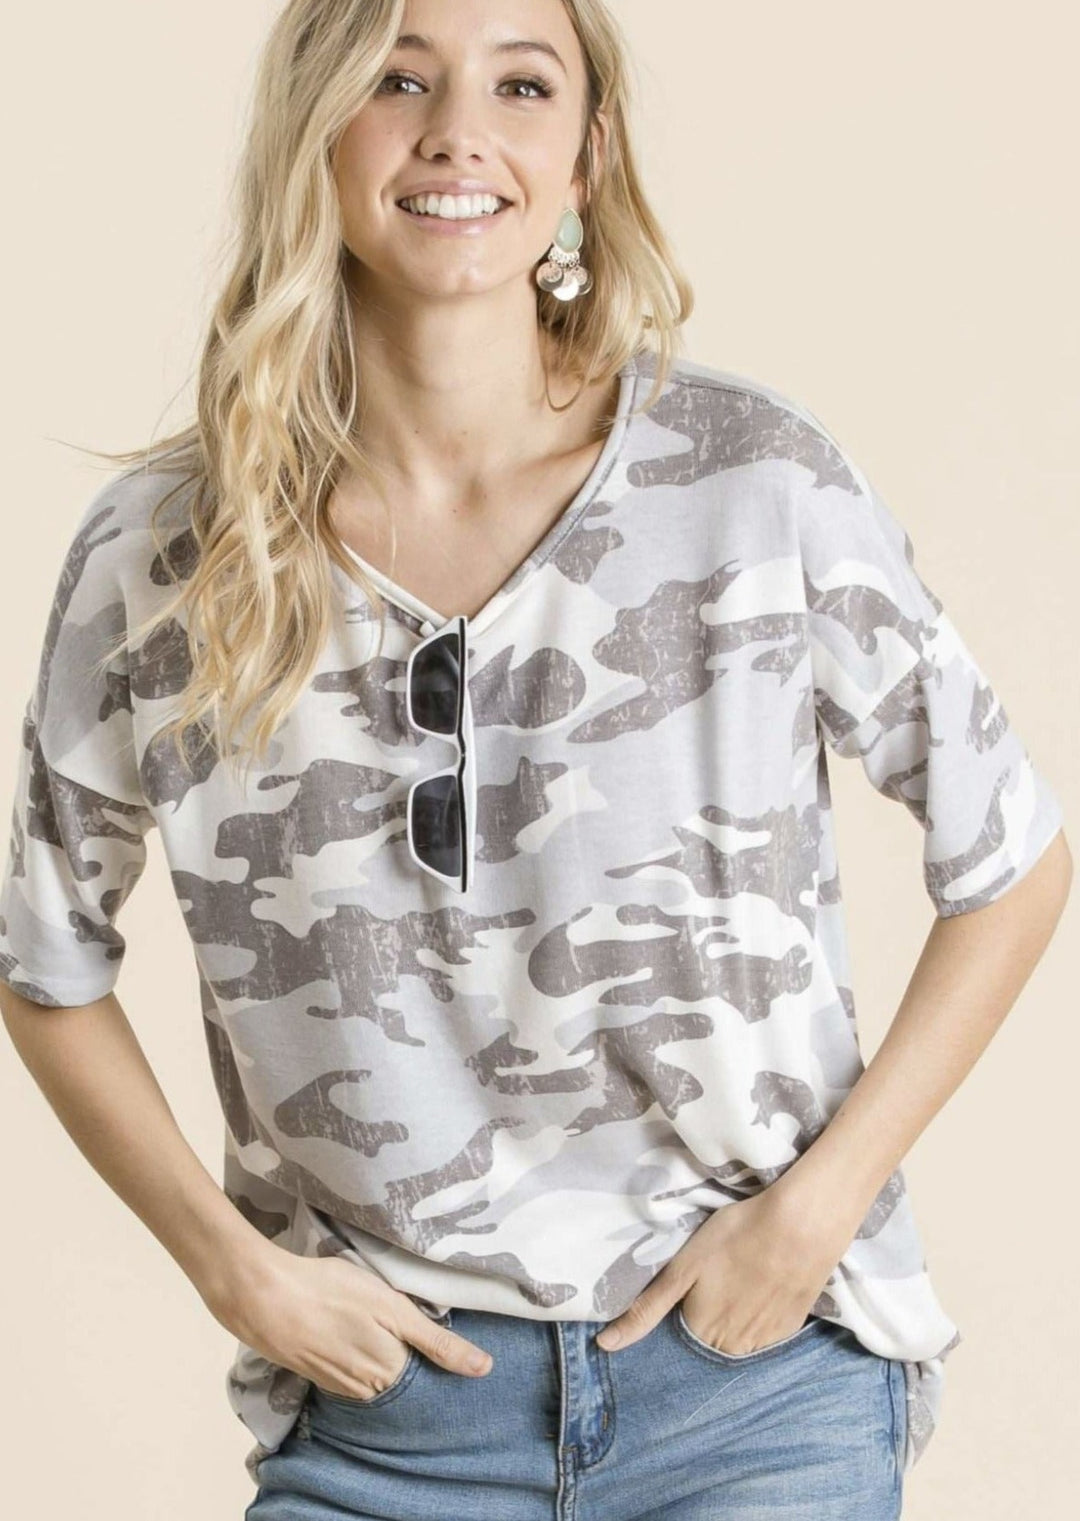 Made in USA Women's Oversized Camo Tee, Round Neckline, Super Soft Material, Lightweight, Longer Length | Classy Cozy Cool Made in America Boutique